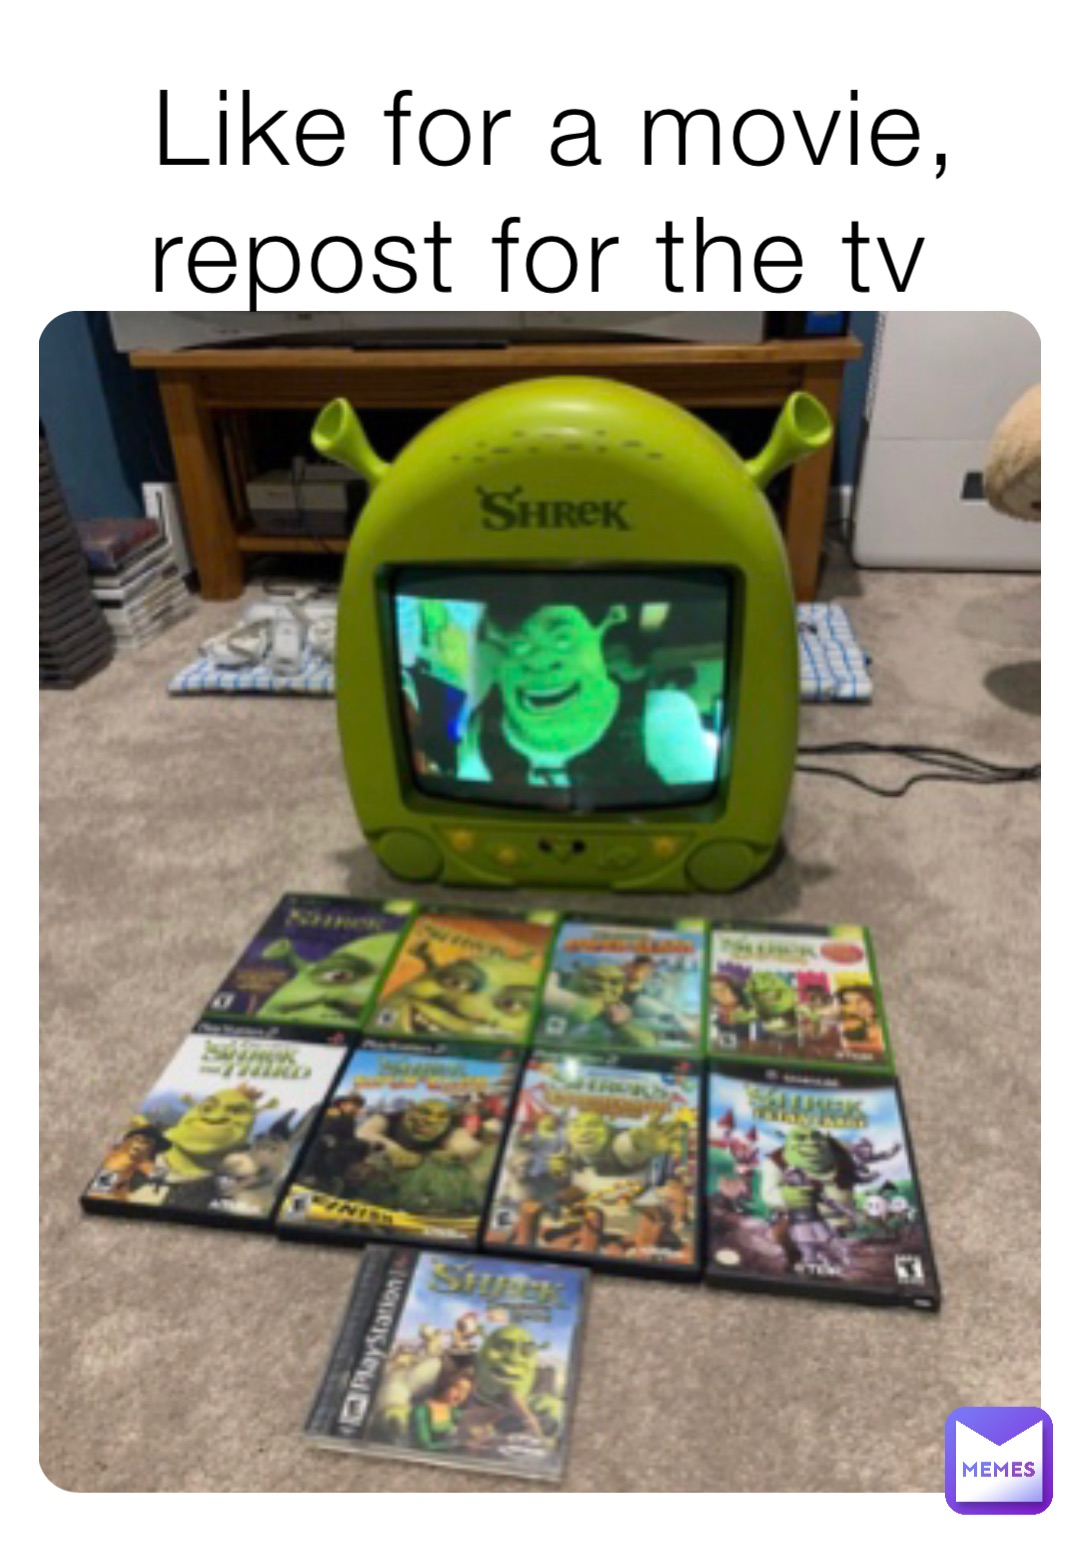 Like for a movie, repost for the tv